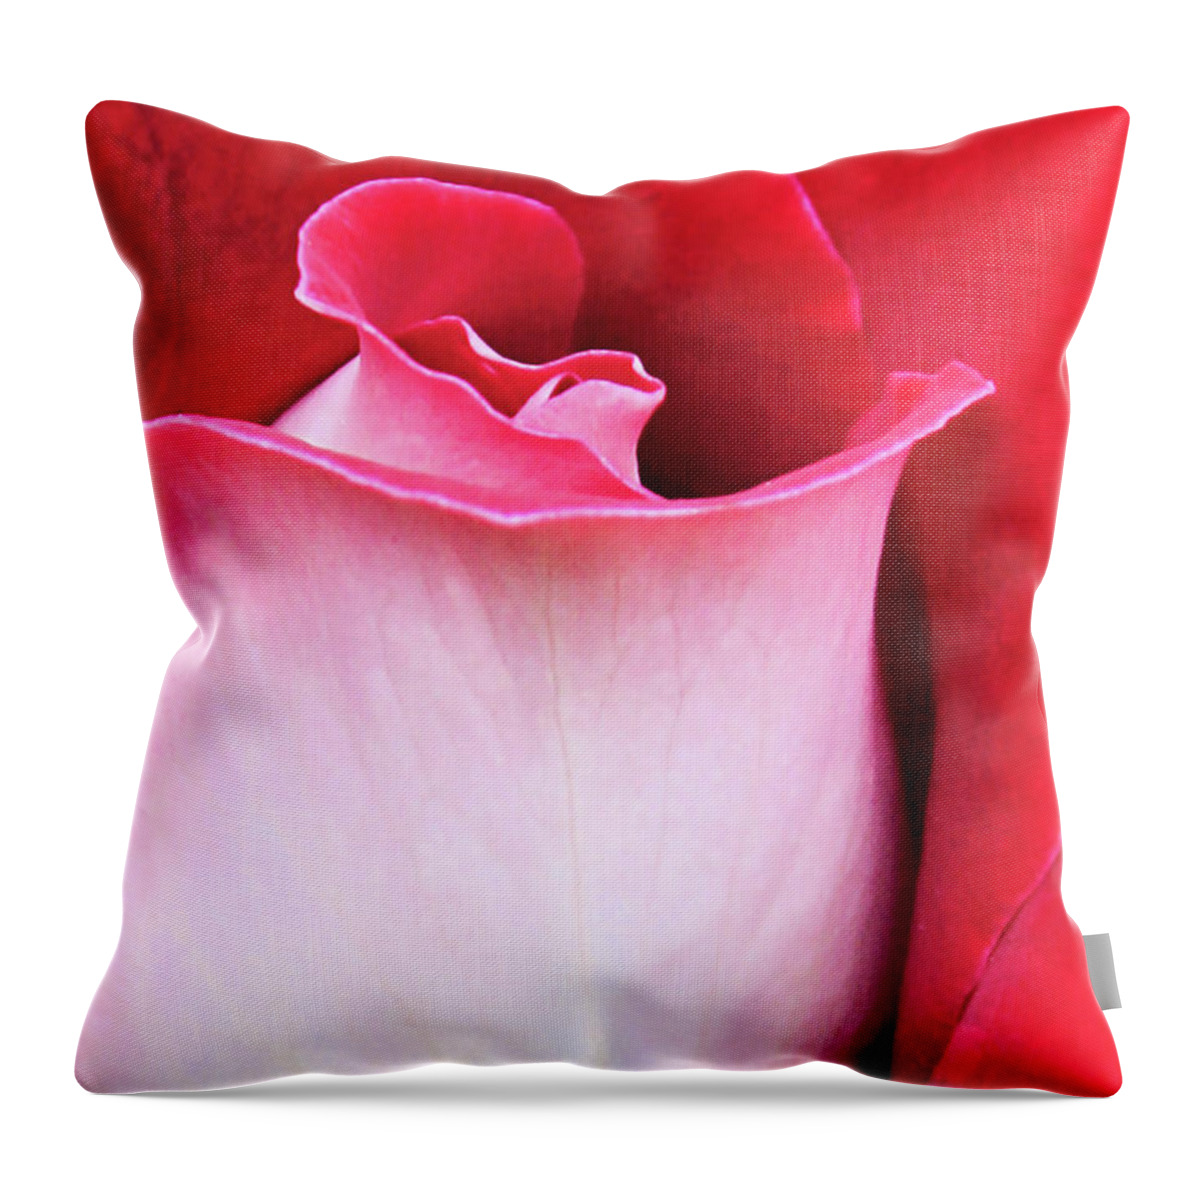 Rose Throw Pillow featuring the photograph Rose Petals by Kristin Elmquist